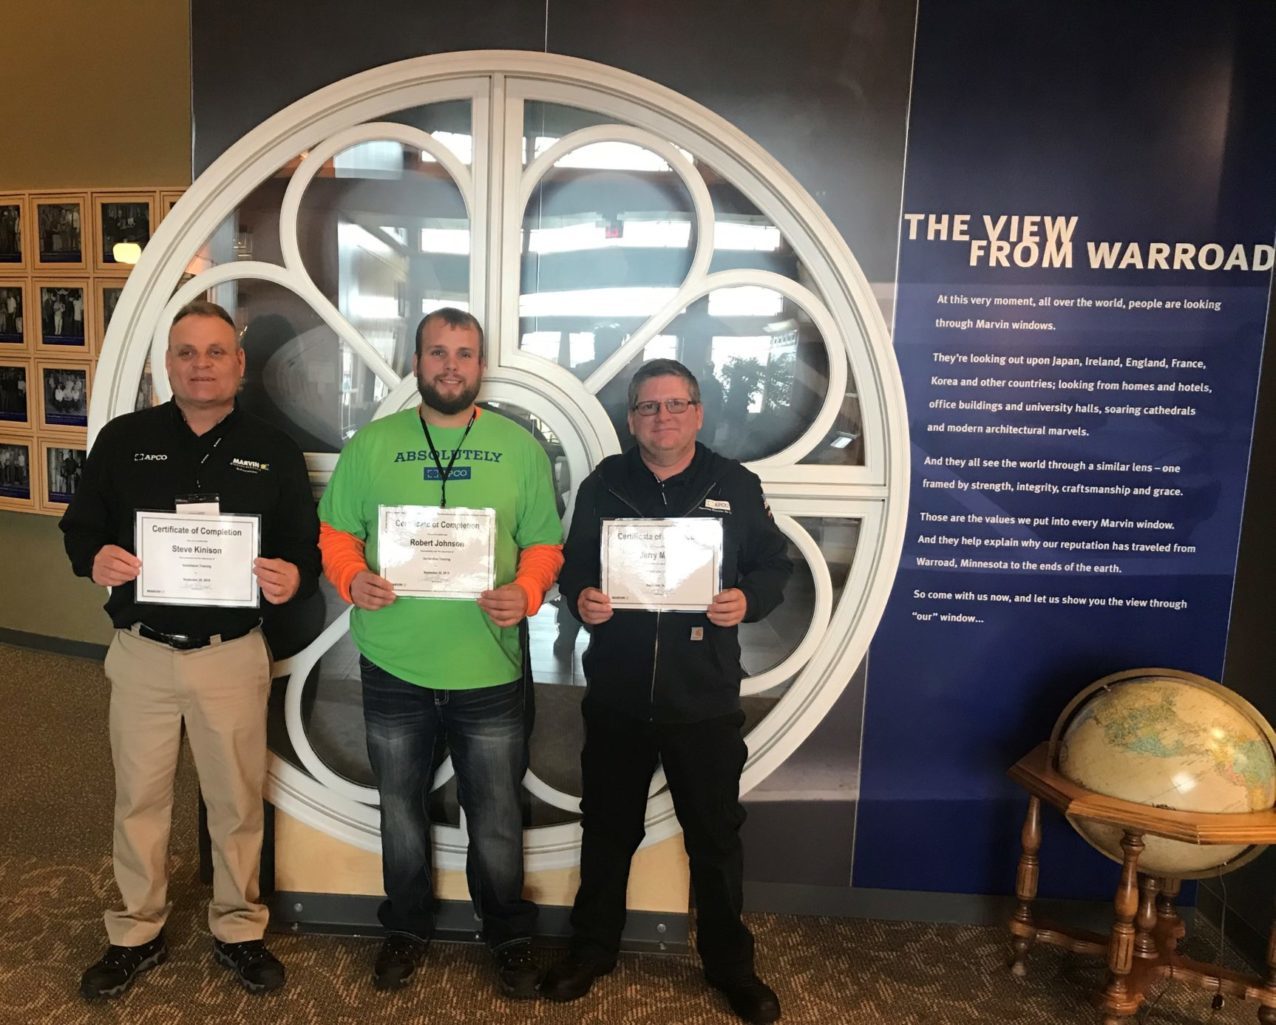 Two more APCO installers and an APCO production manager become officially certified in window and door installation after an all-expense-paid trip to Warroad, Minnesota.